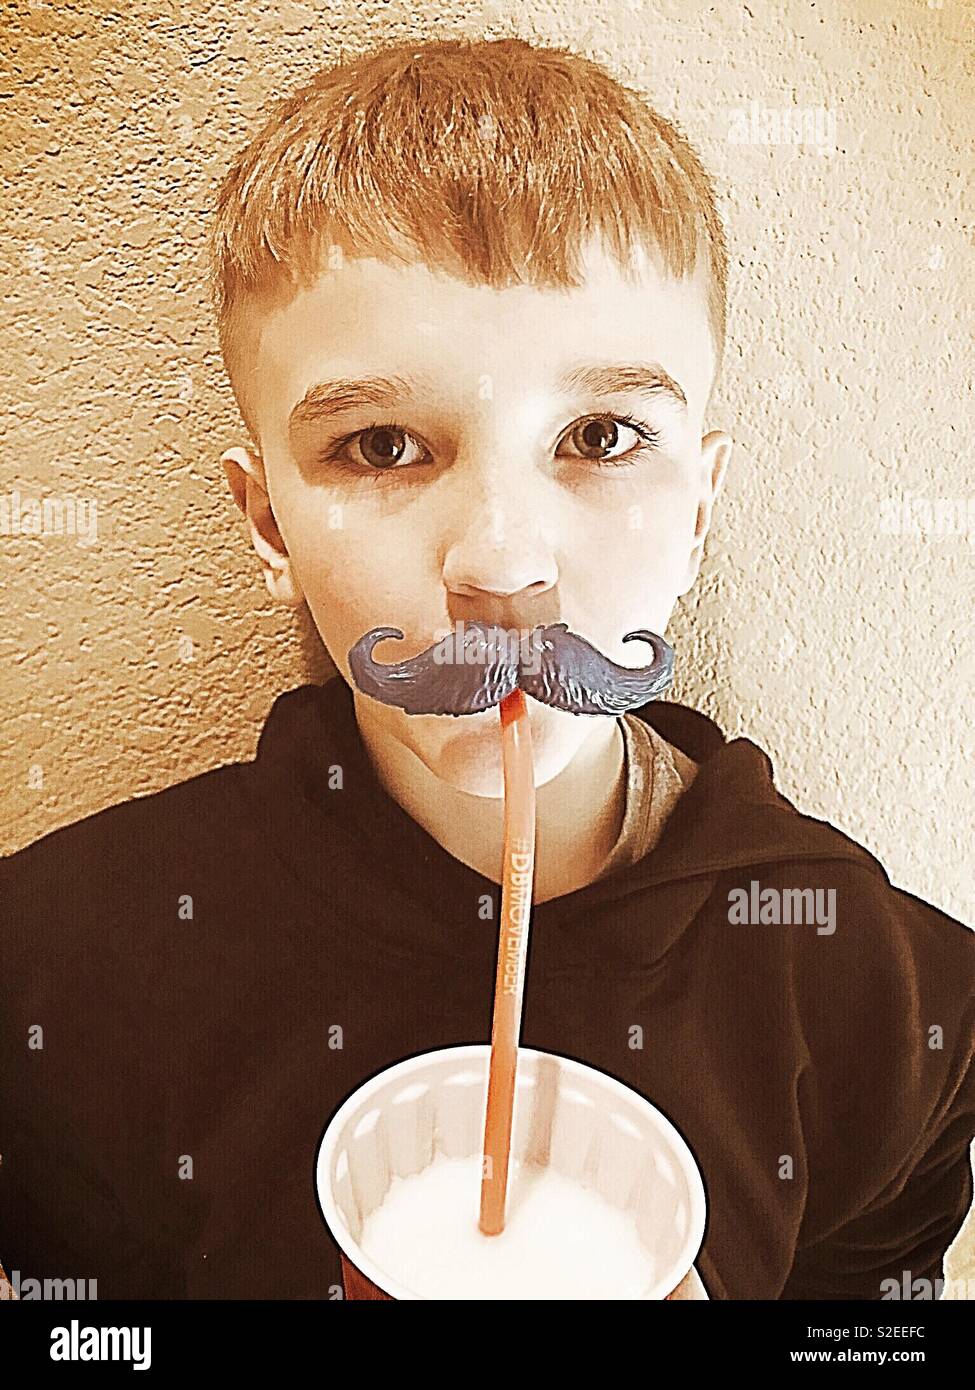 Boy drinking milk through silly straw glasses, while looking up Stock Photo